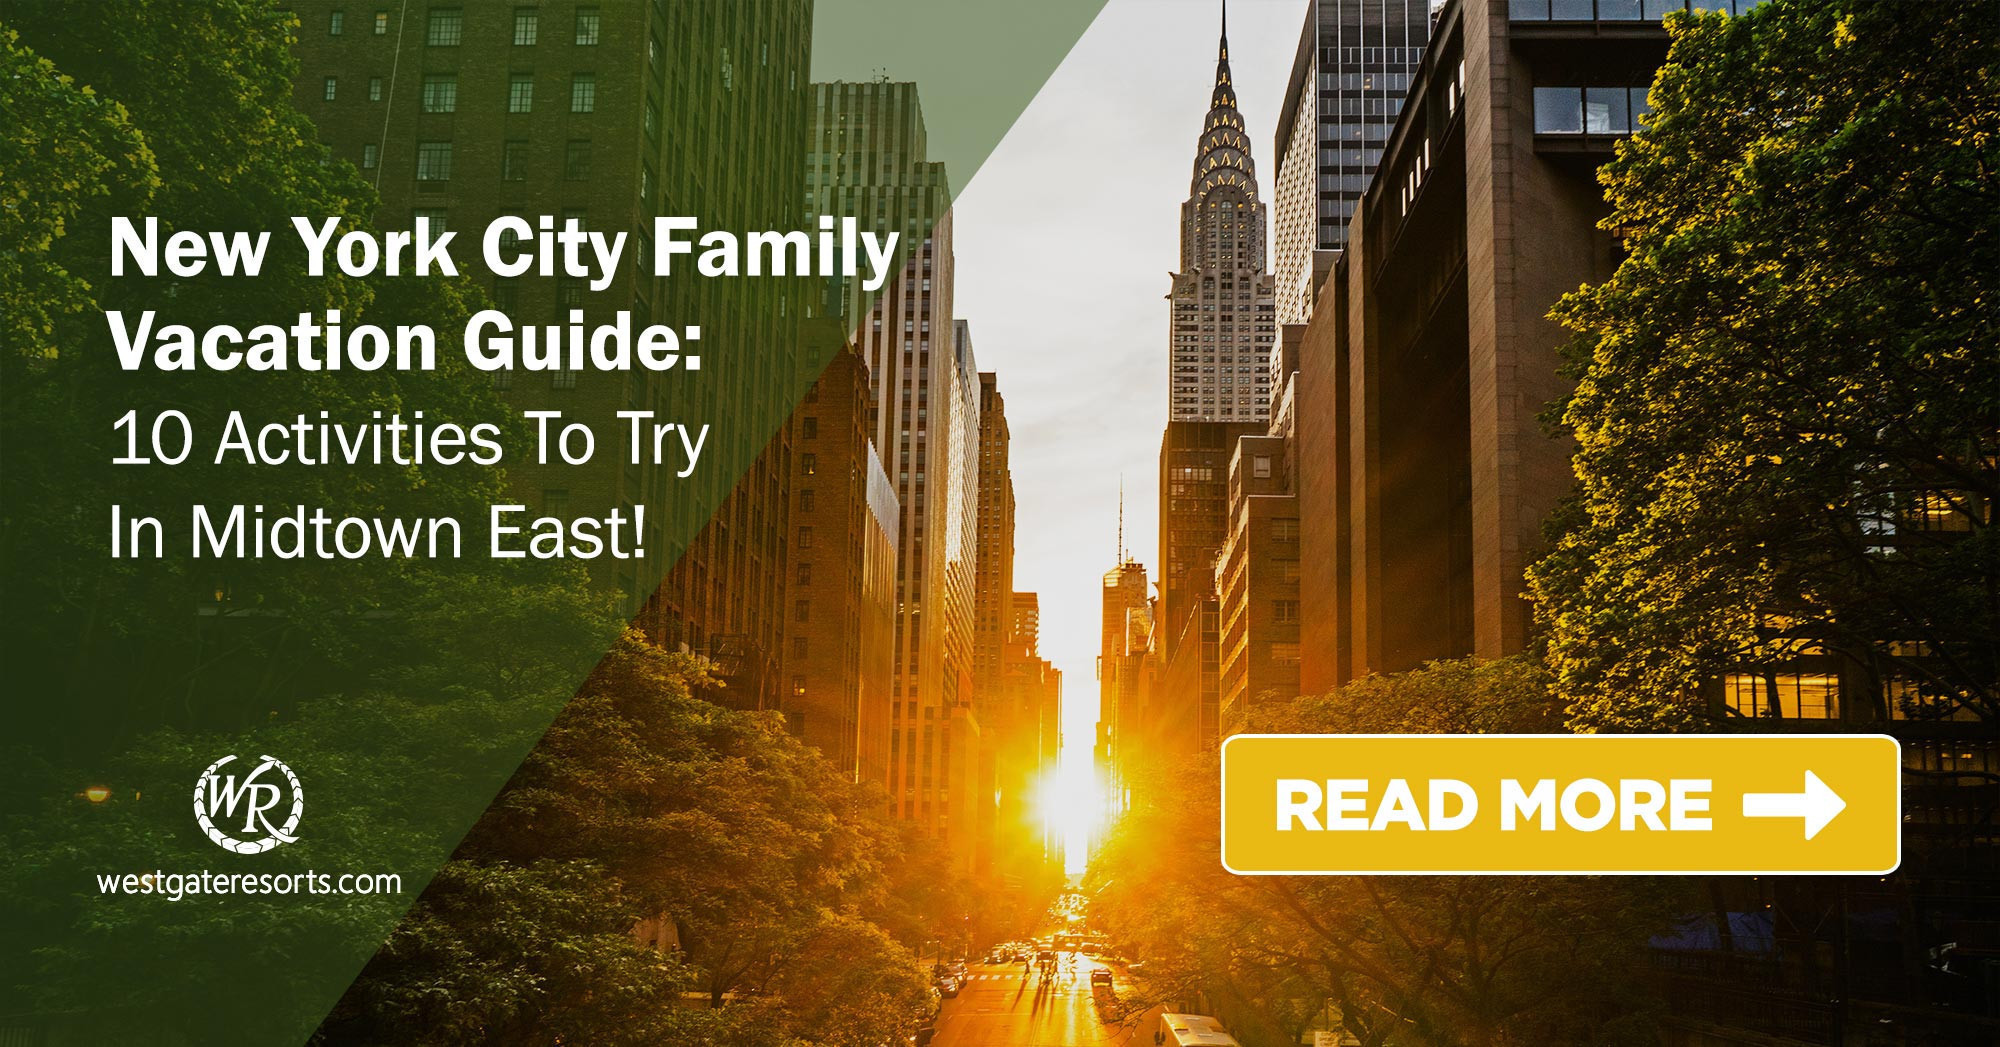 10 Activities In Midtown East For Kids | New York City Family Vacations